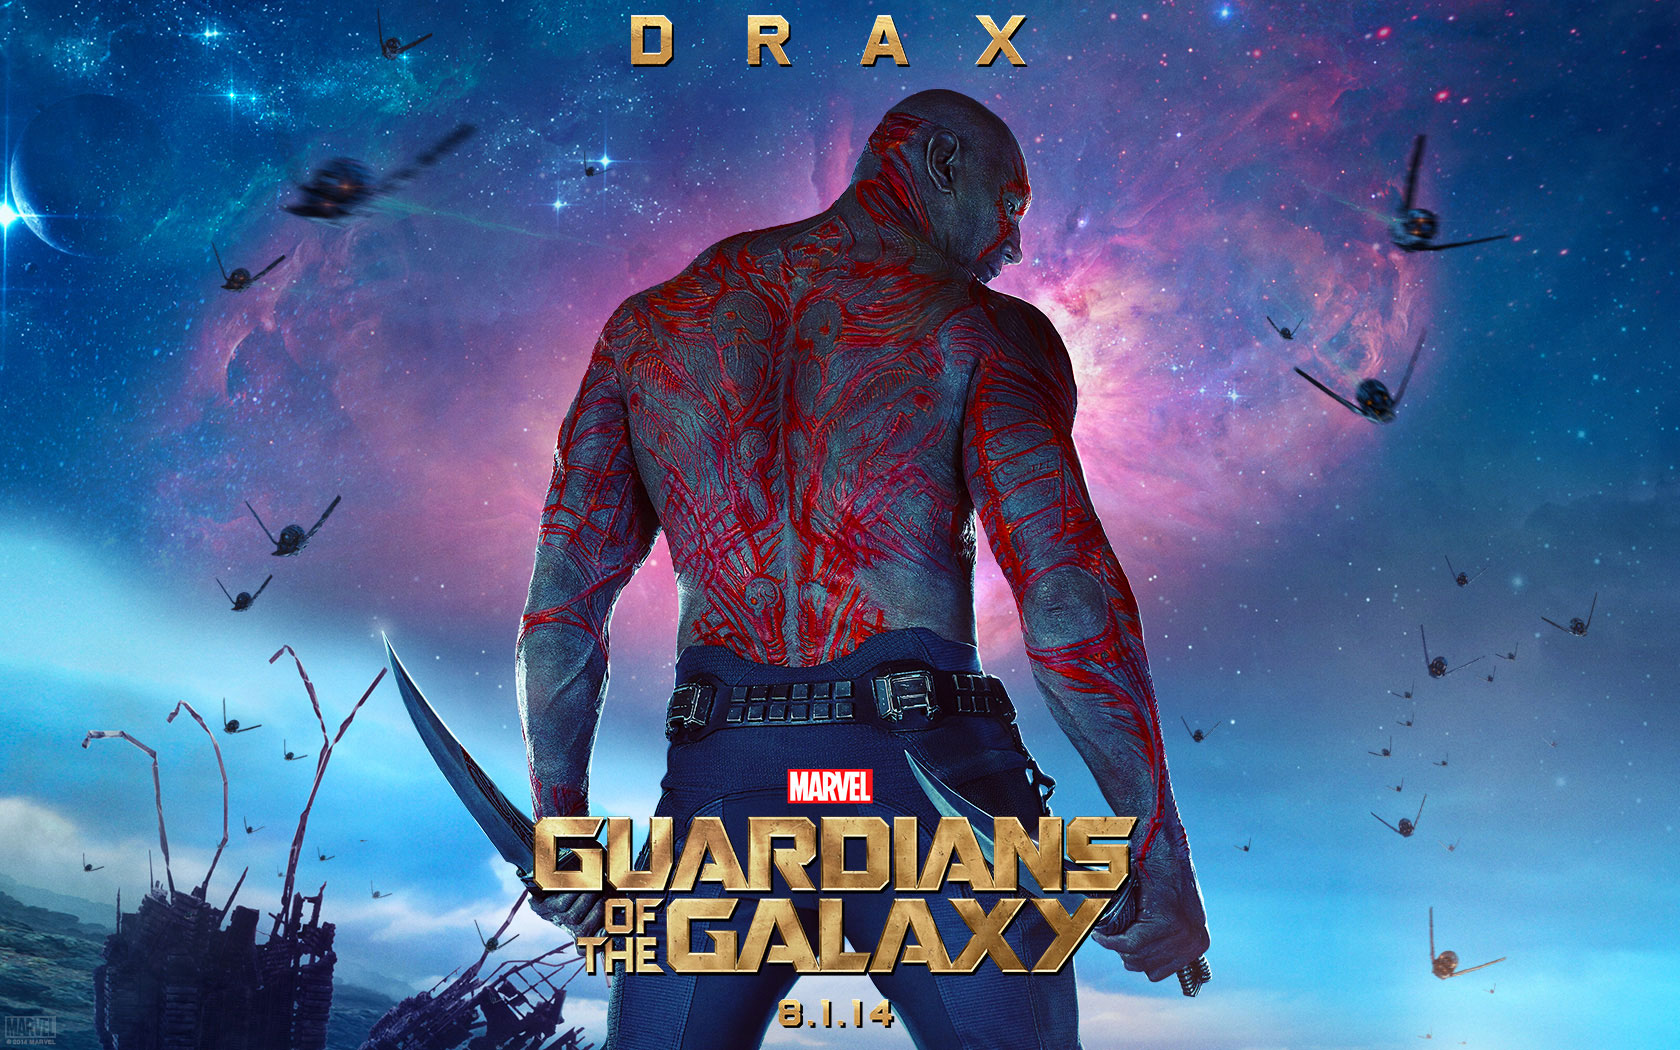 Guardians Of The Galaxy Wallpaper Image And Save As Click